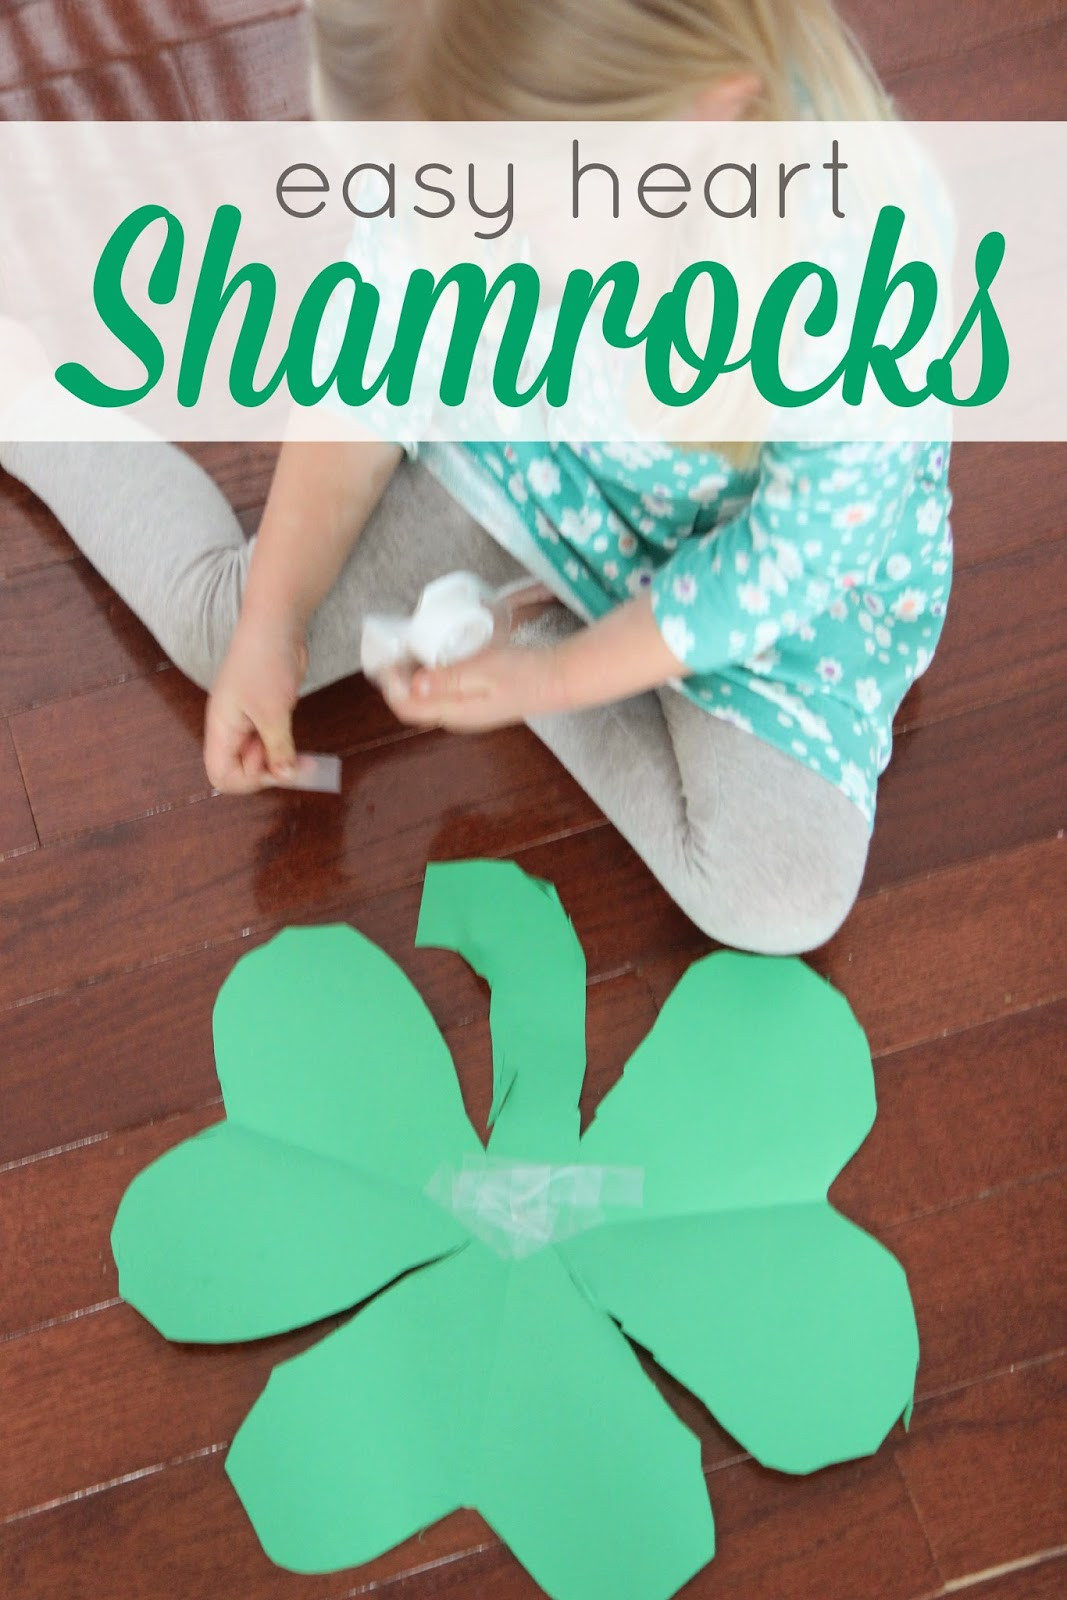 St Patrick's Day Crafts For Preschoolers Easy
 Toddler Approved 8 Easy St Patrick s Day Crafts for Kids